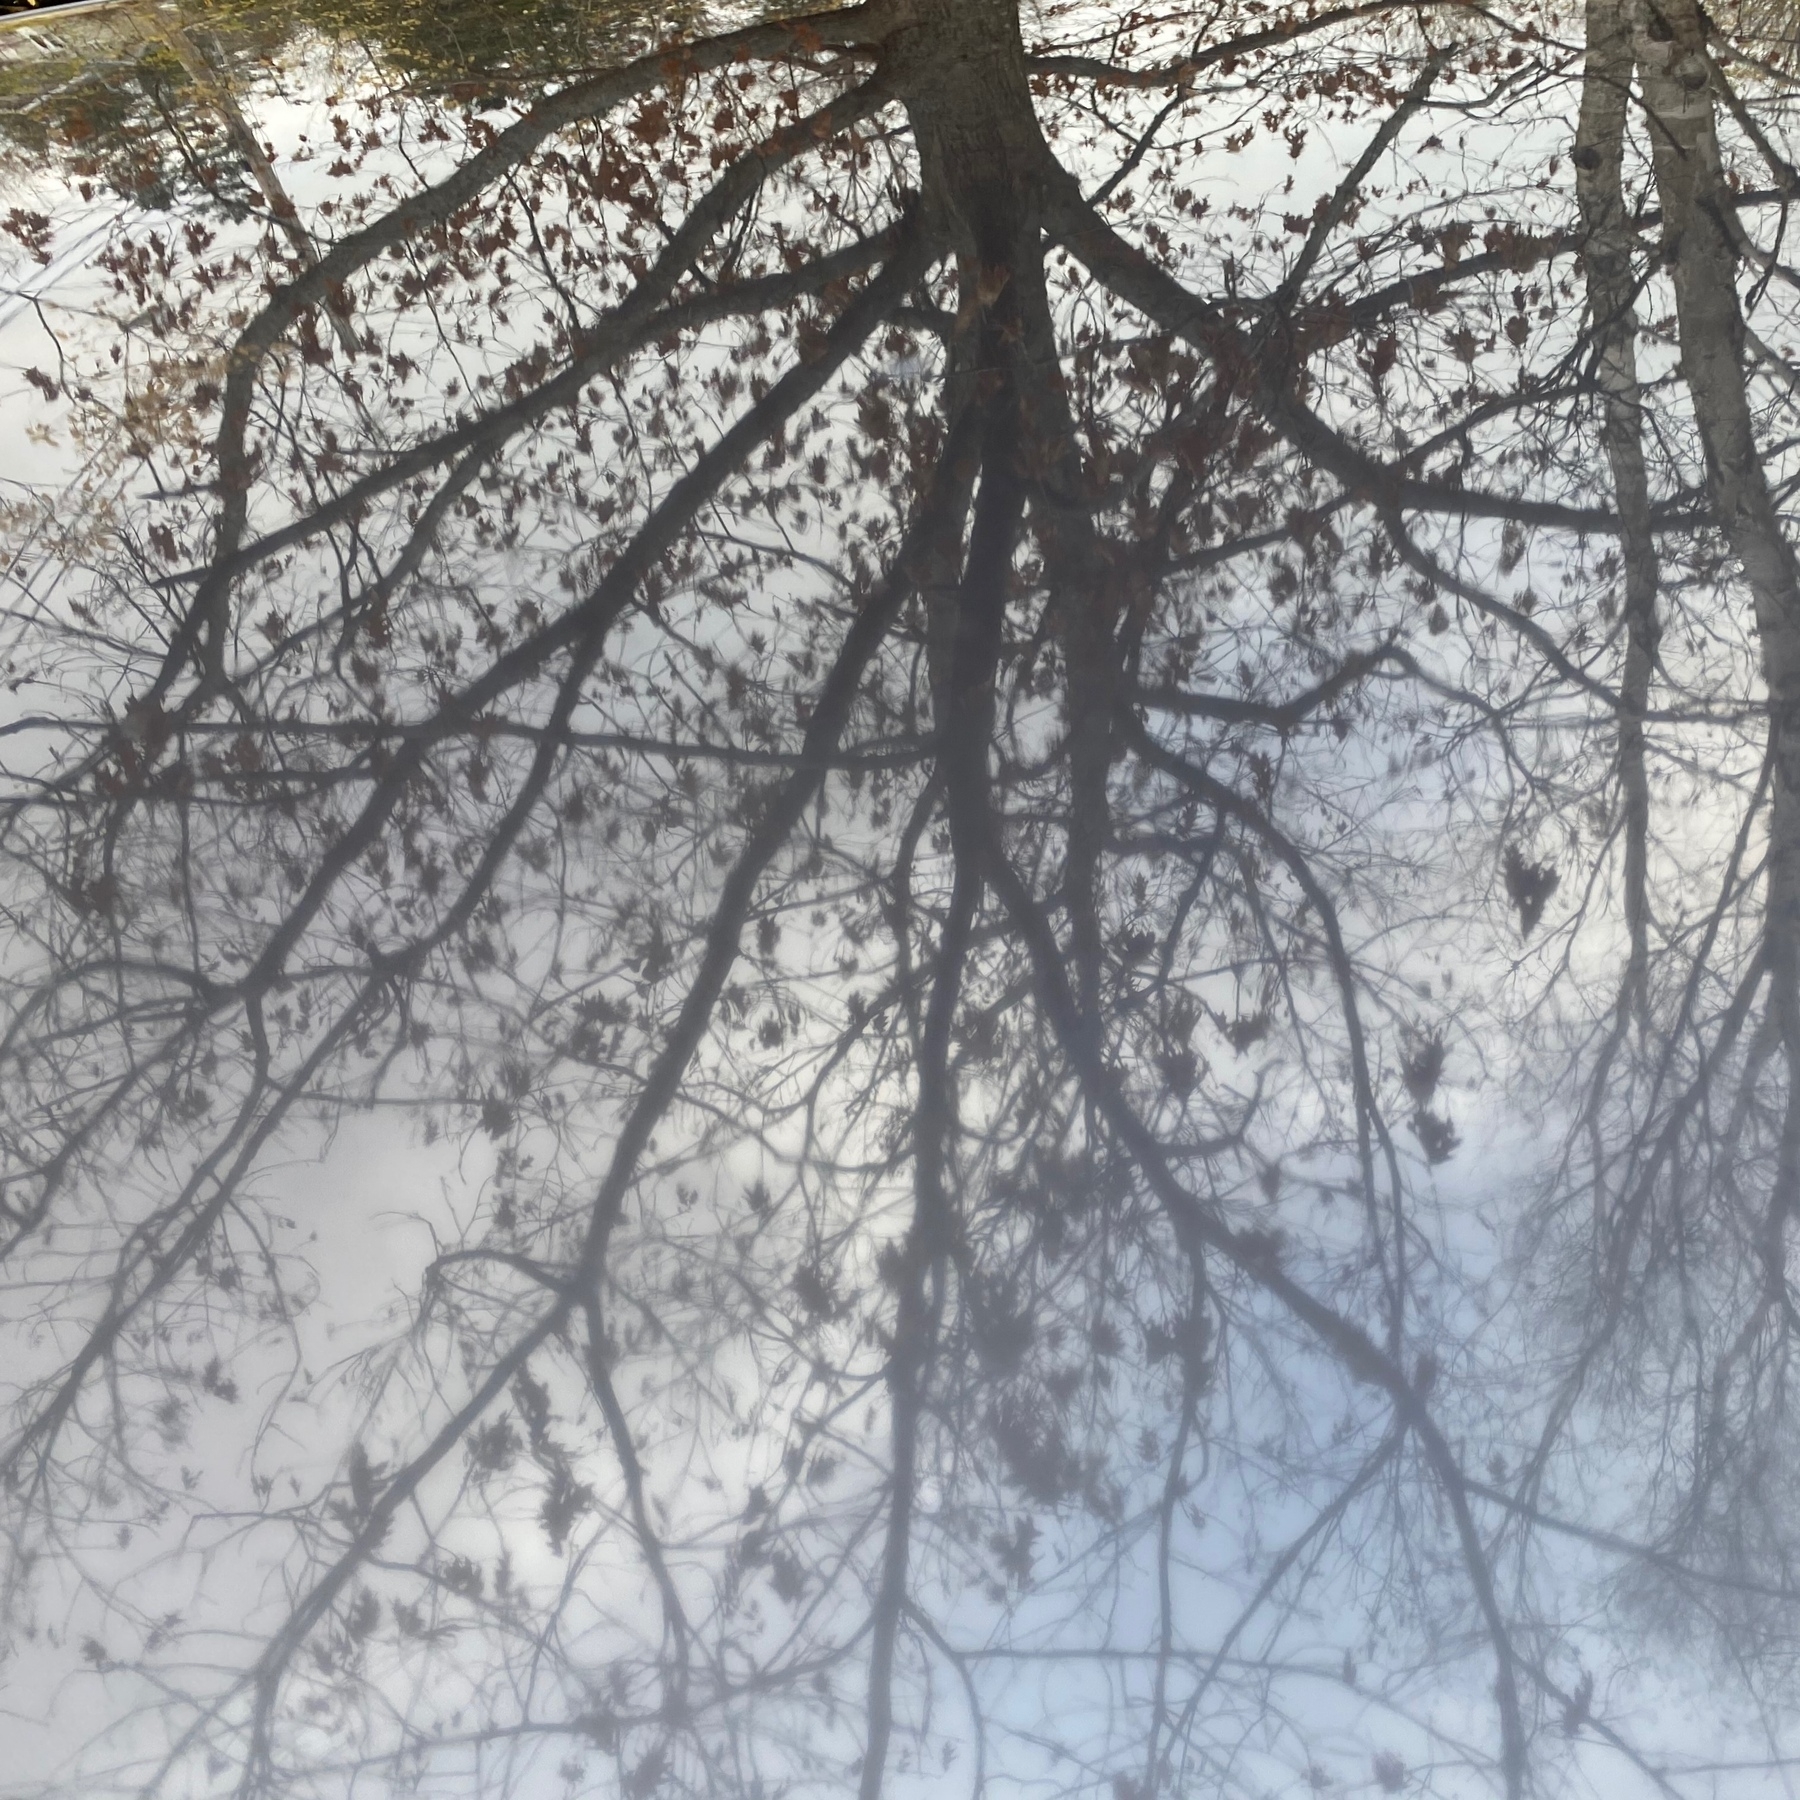 Trees reflected in roof of car.